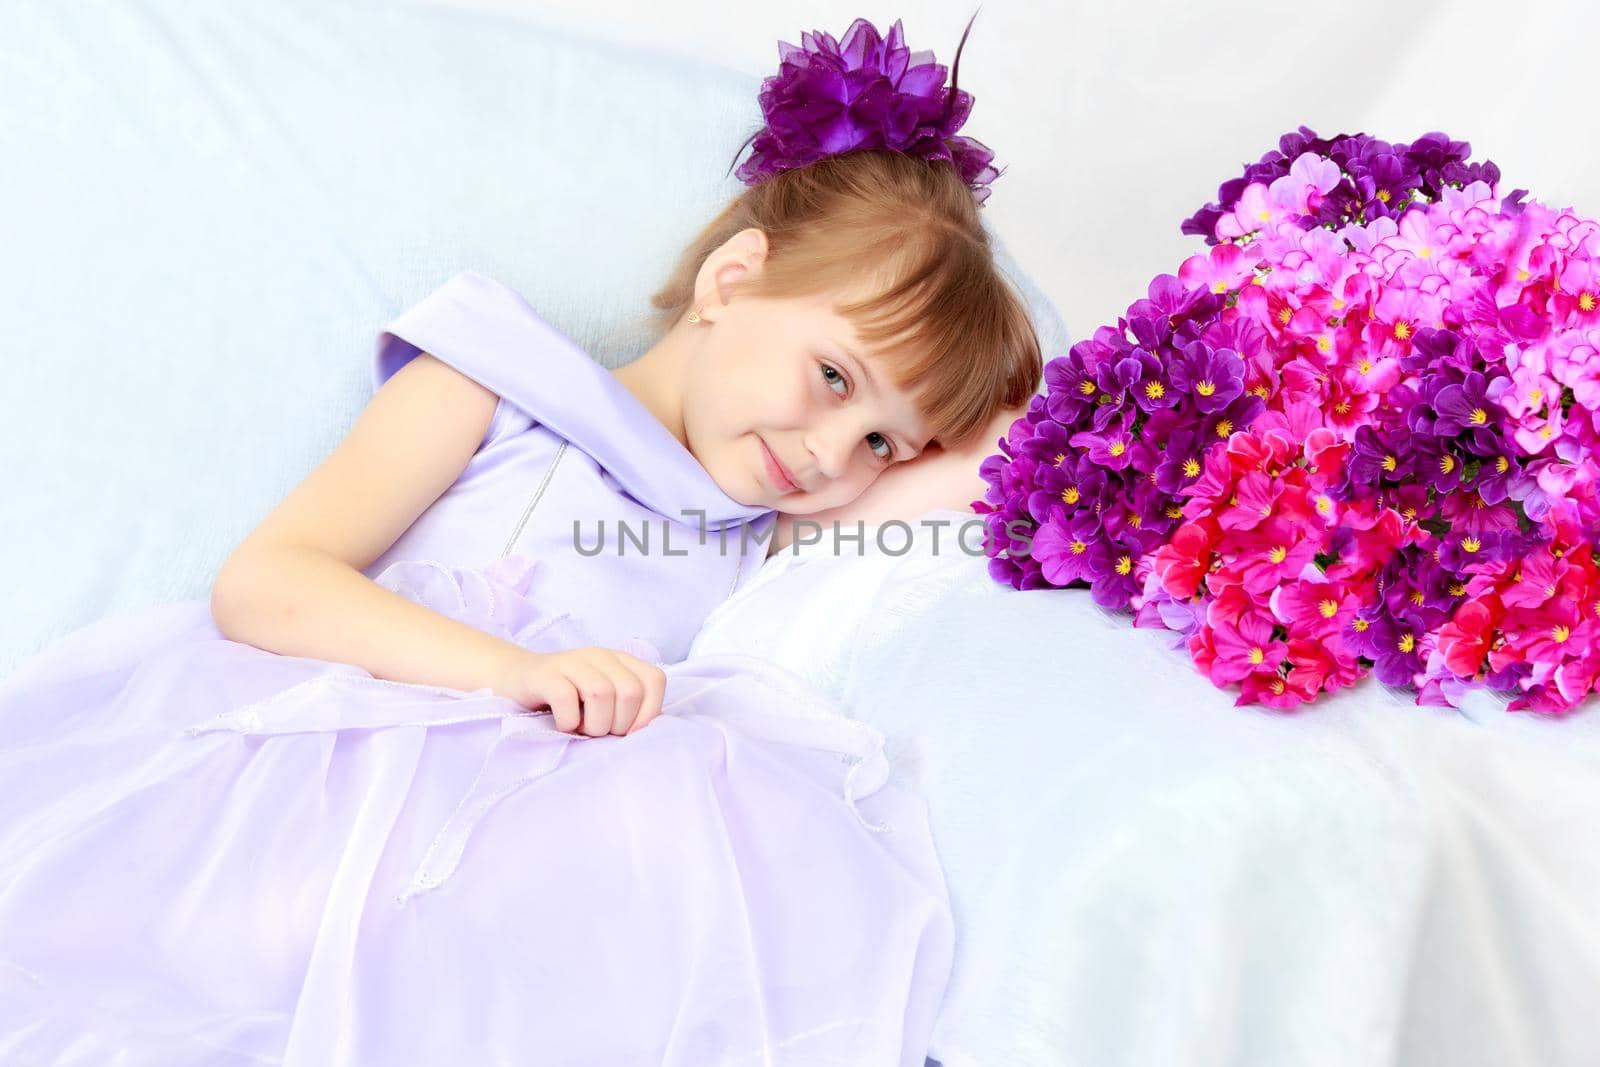 Fashionable little girl in a stylish beautiful dress.The girl sits on a luxurious white armchair near a large bouquet of flowers.